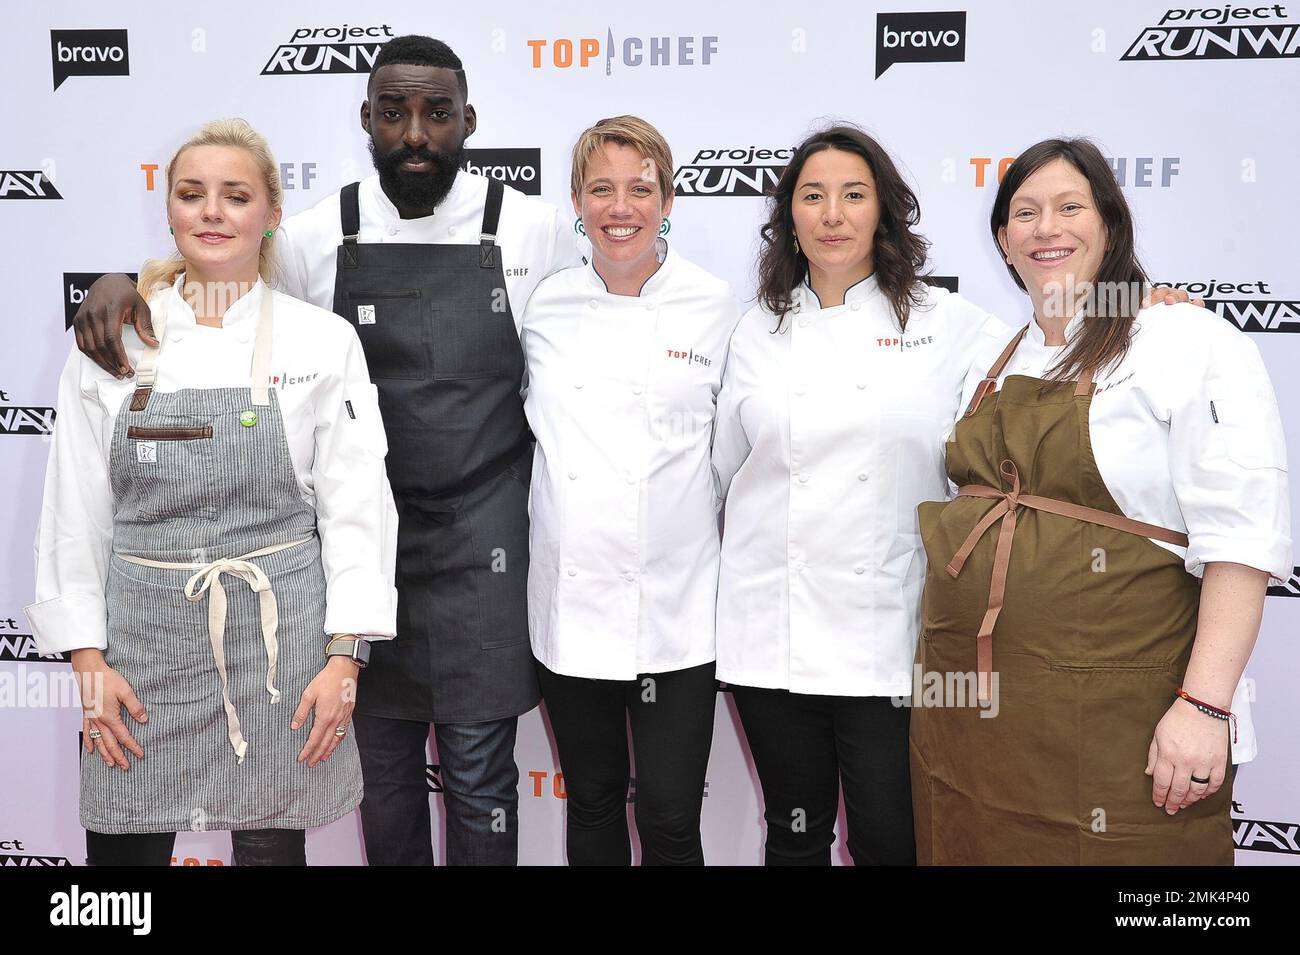 Kelsey Barnard Clark, from left, Eric Adjepong, Adrienne Wright, Michelle  Minori and Sara Bradley attend Top Chef and Project Runway 'A Night of Food  and Fashion' at Vibiana on Tuesday, April 16,